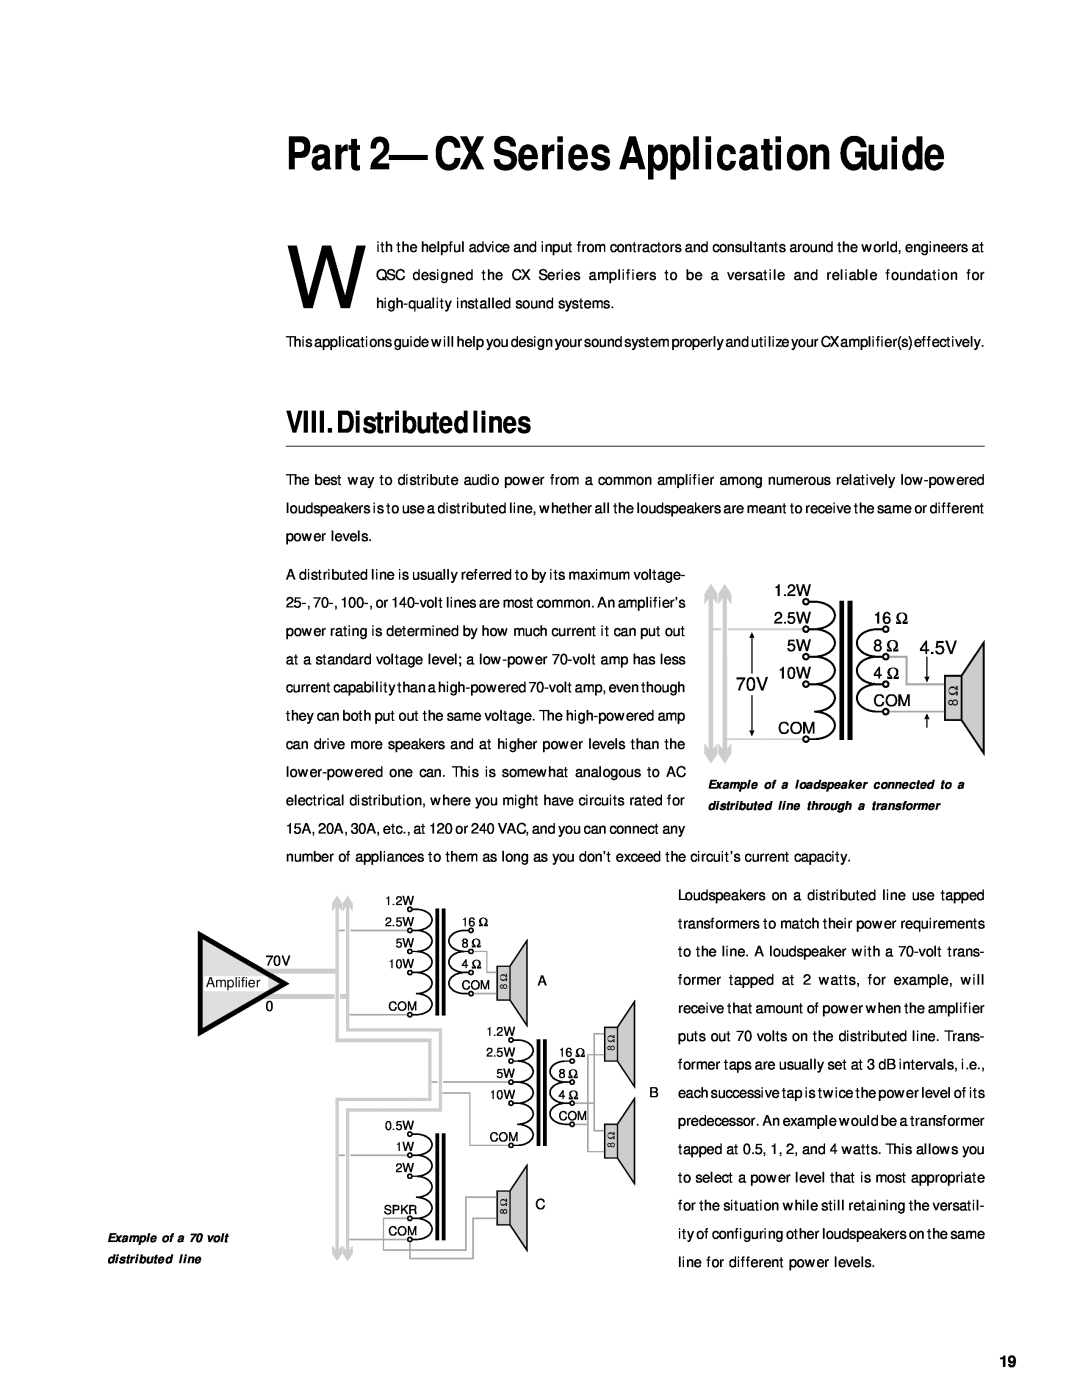 QSC Audio CX Series user manual VIII. Distributed lines, Part 2-CXSeries Application Guide, 70V 10W, 4.5V 